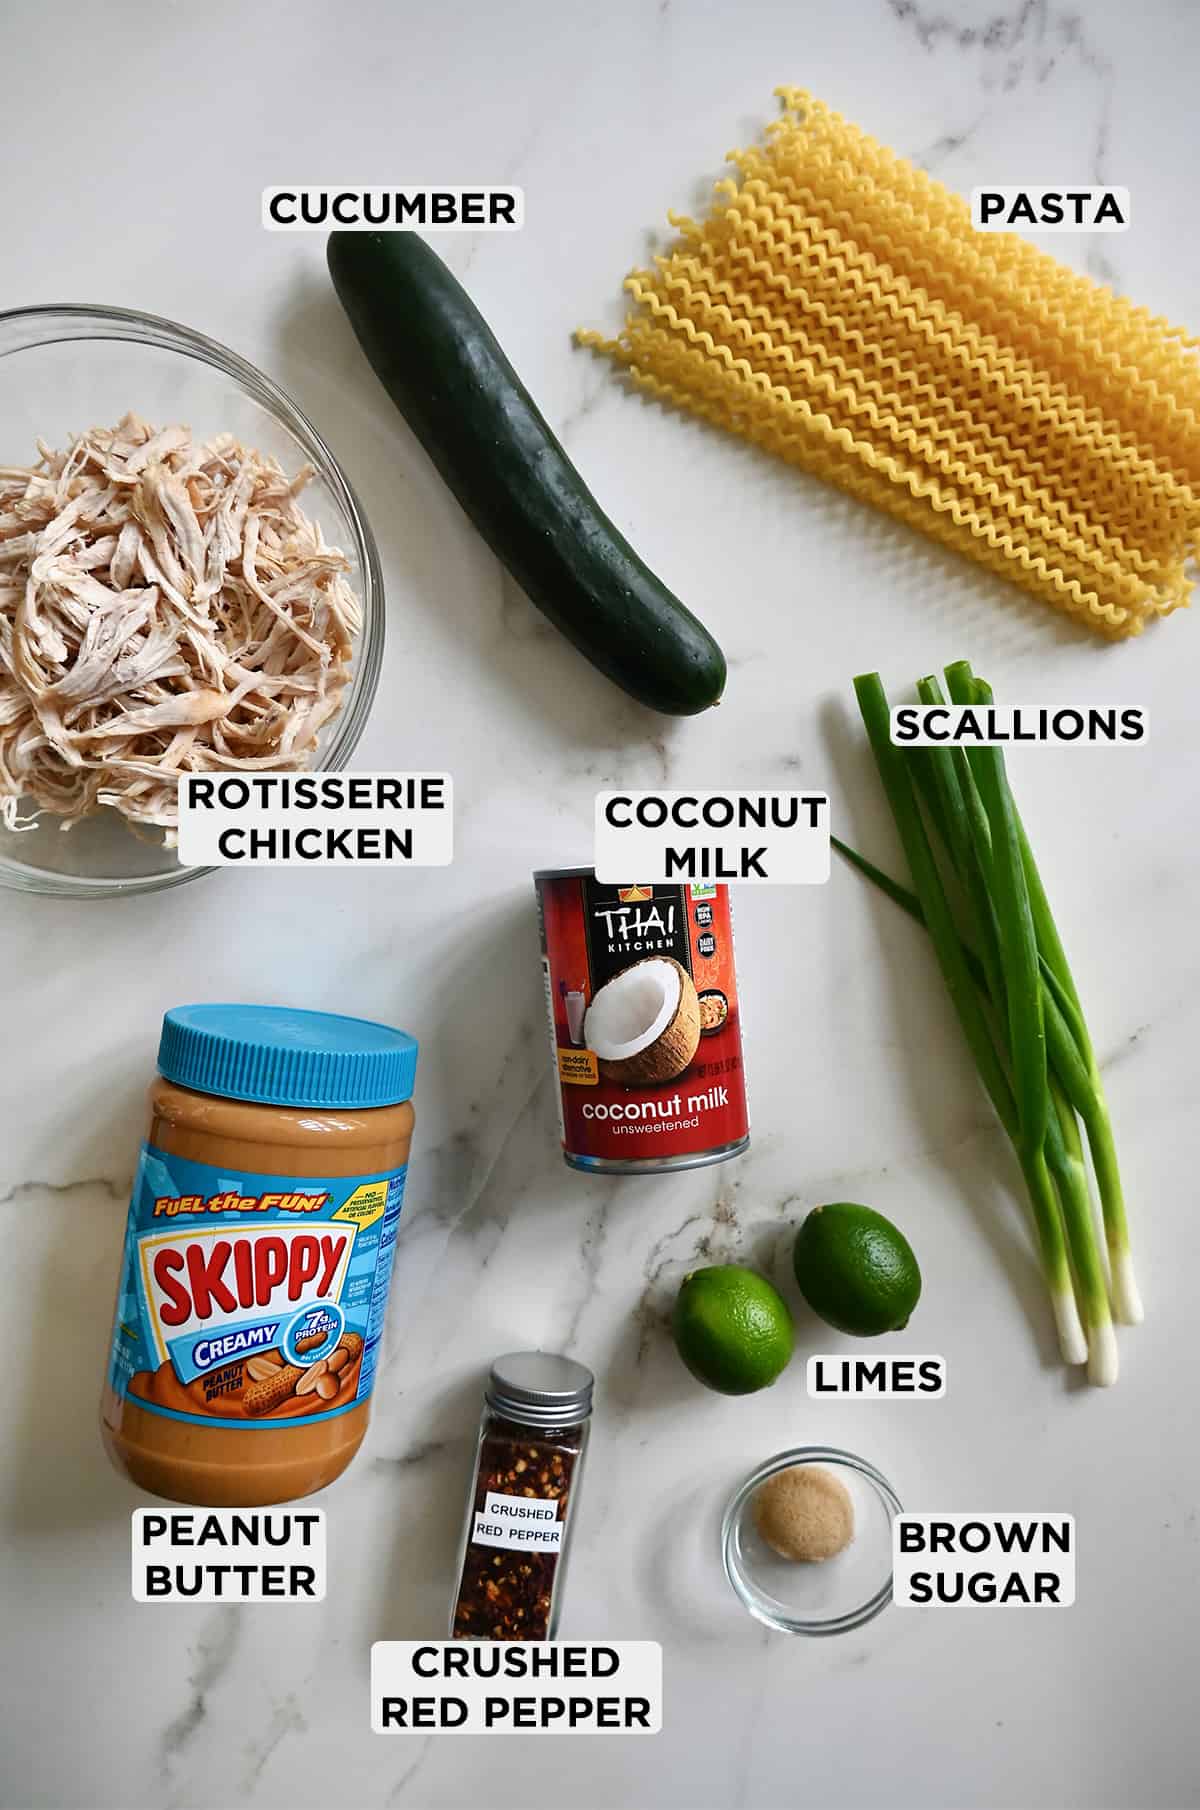 All the ingredients needed to make Thai Pasta Salad, including long pasta noodles, scallions, limes, brown sugar, crushed red pepper flakes, peanut butter, coconut milk and chicken.